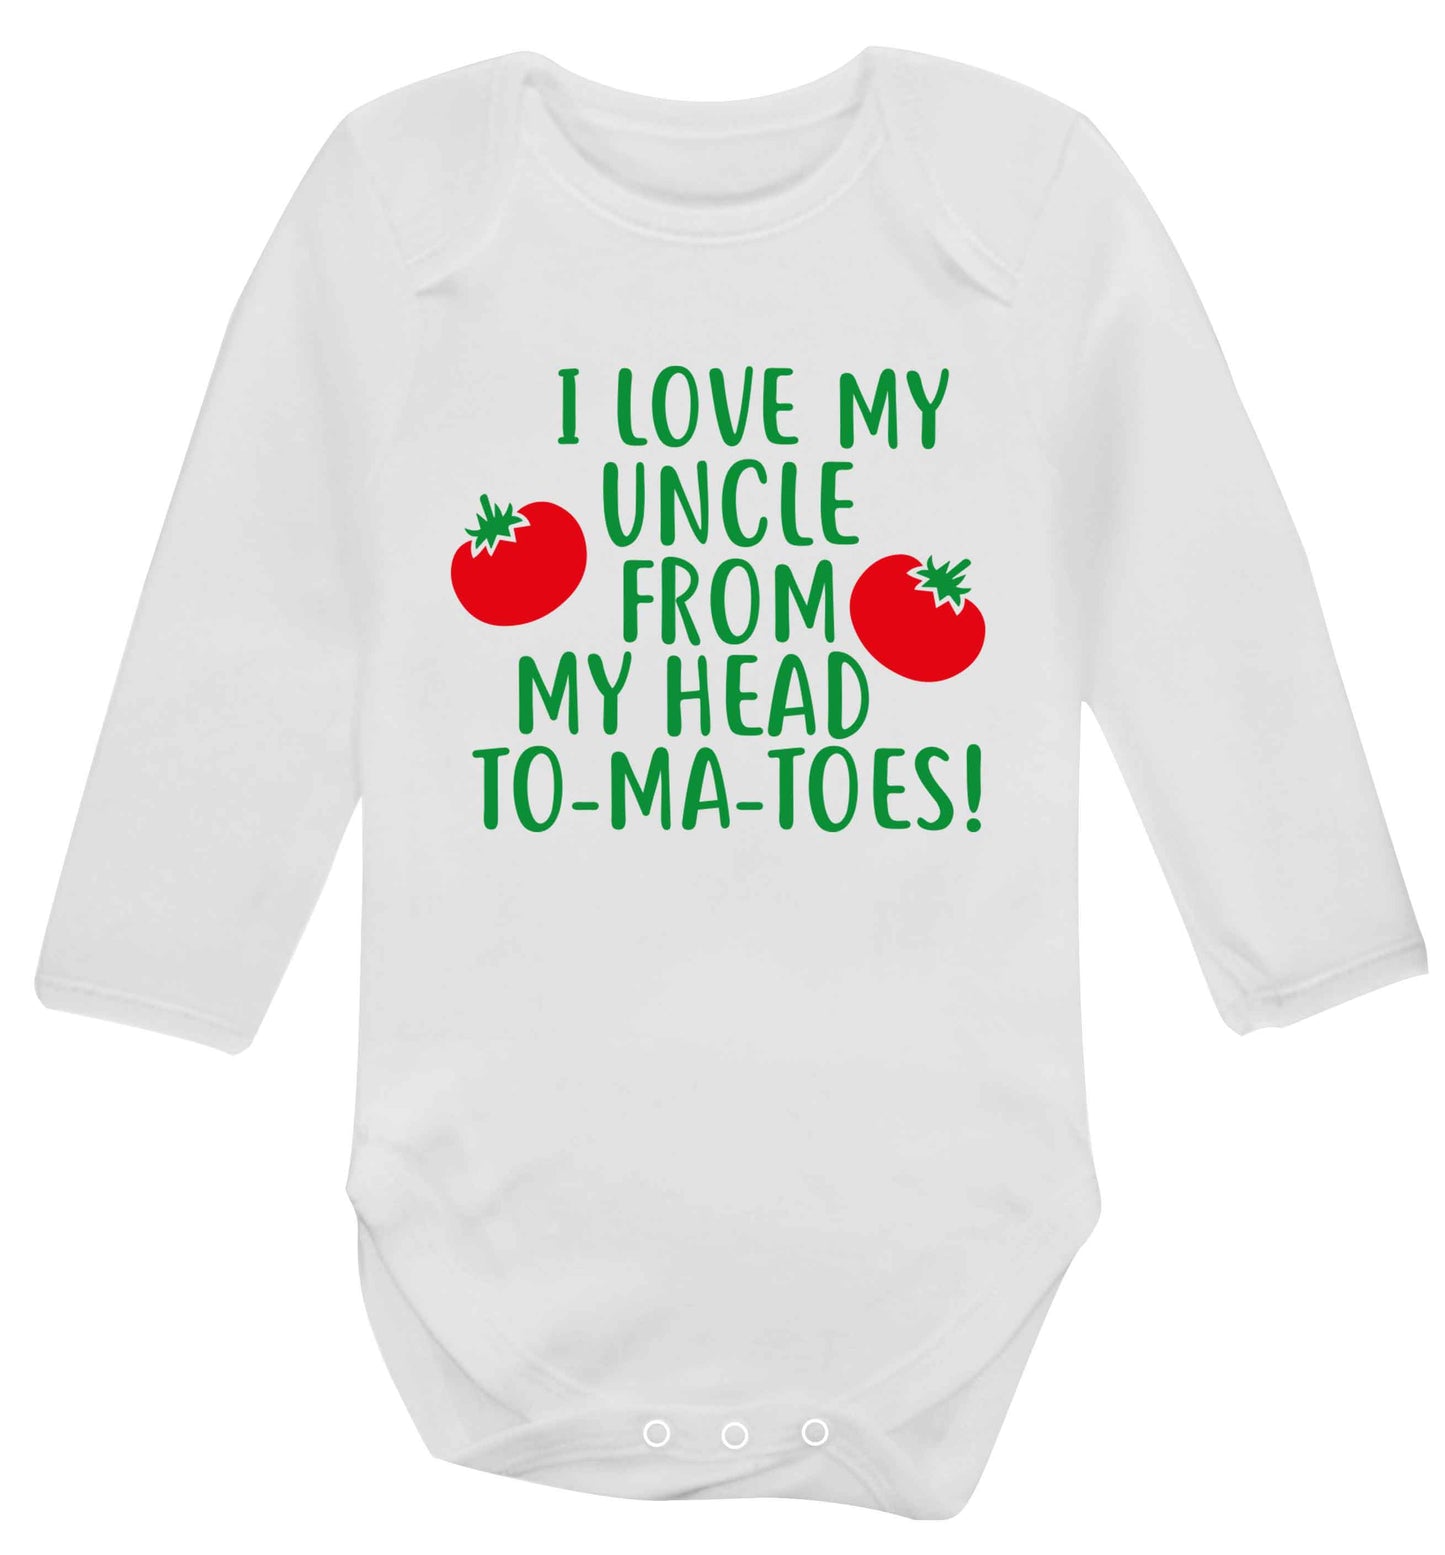 I love my uncle from my head To-Ma-Toes Baby Vest long sleeved white 6-12 months